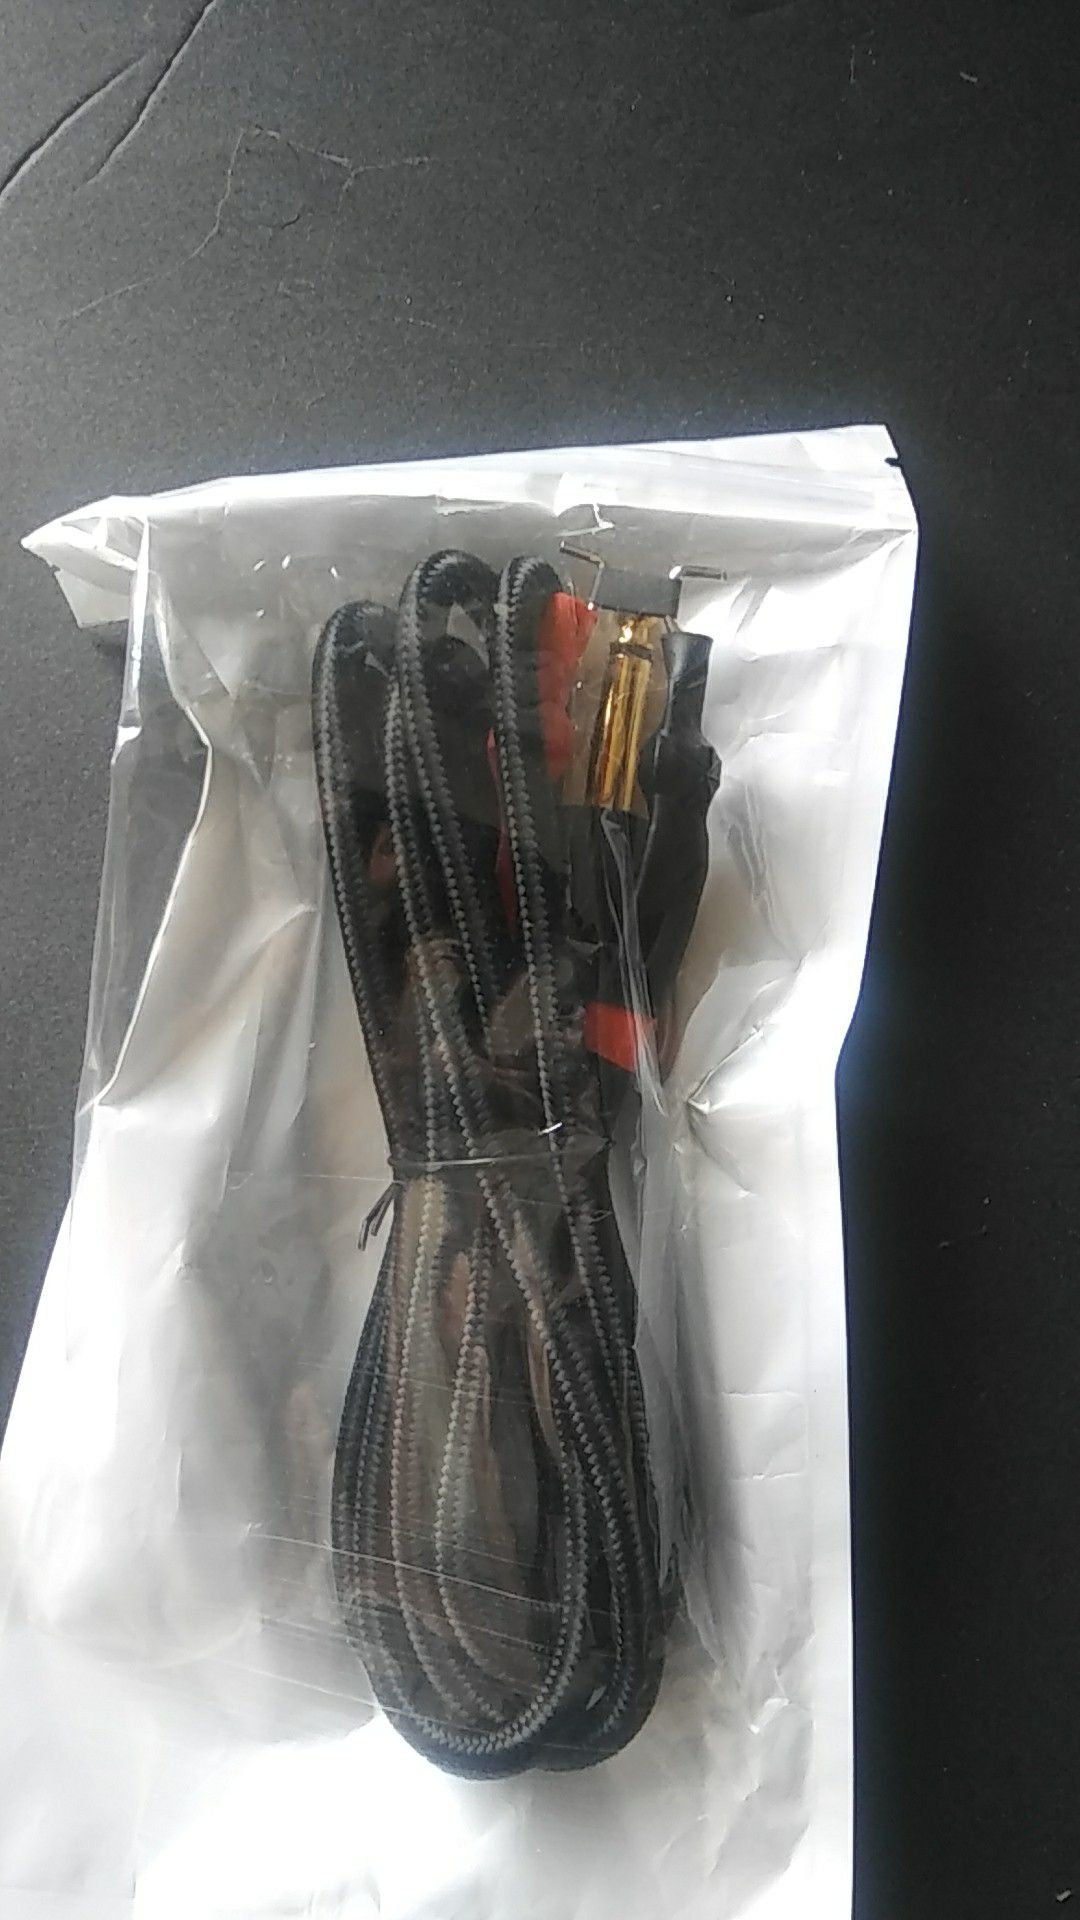 High quality clipcords tattoo Supplies